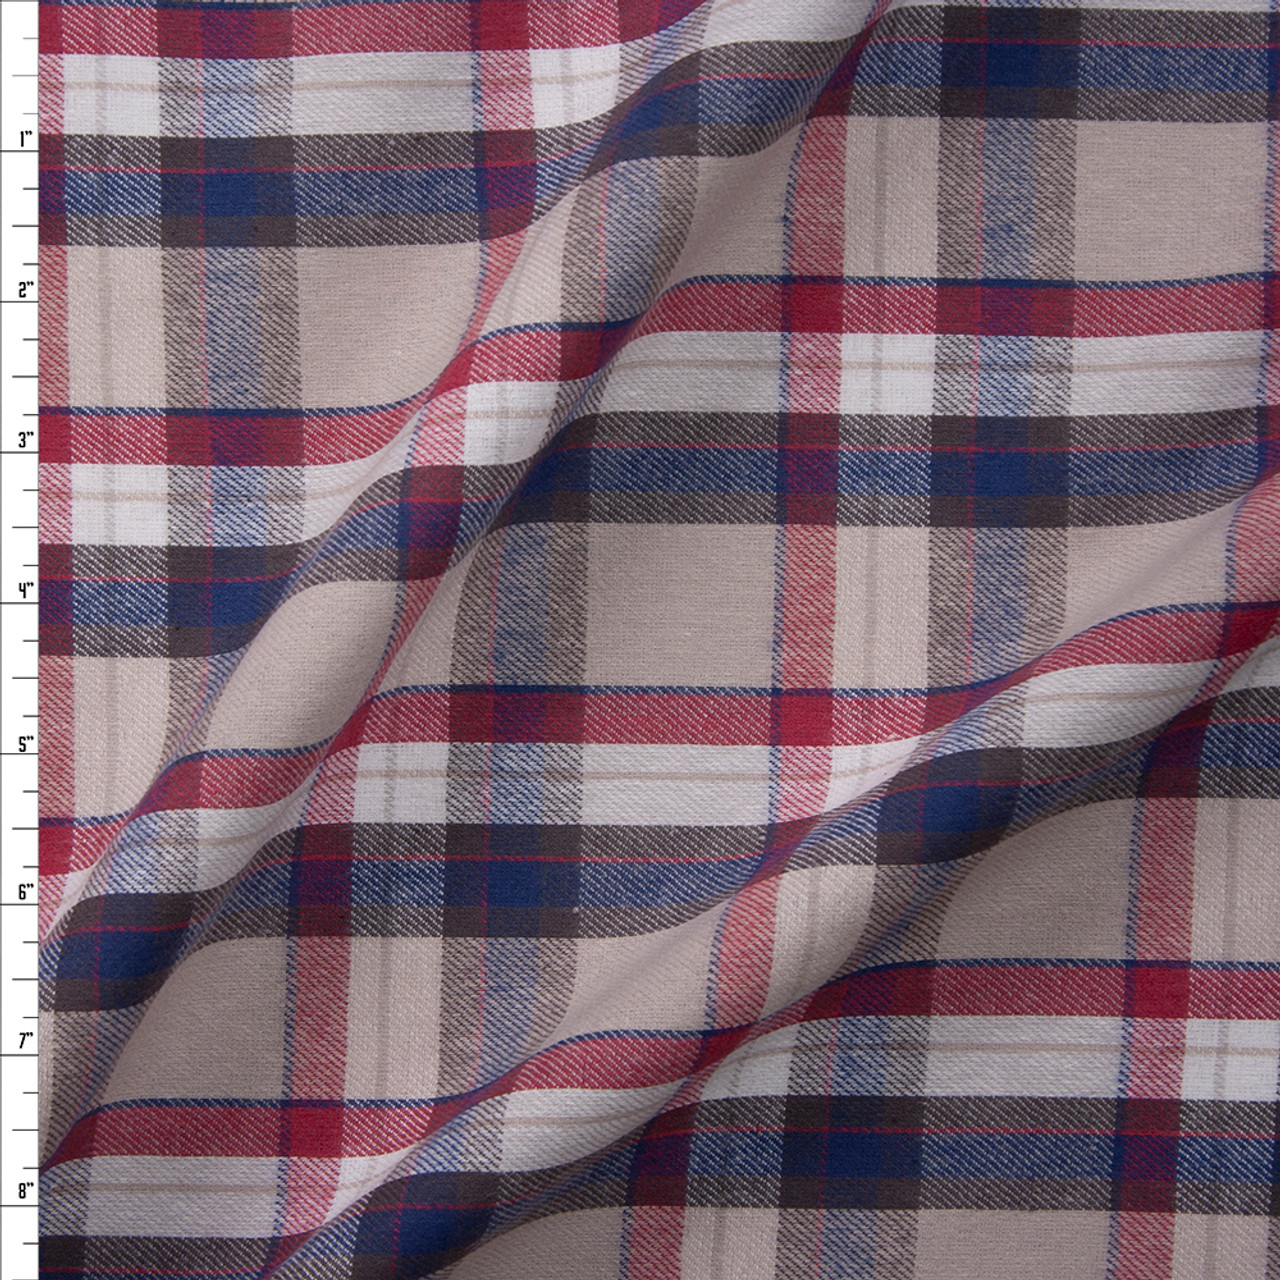 Plaid in Red / Blue / Green / White, Flannel Fabric, 44 Wide, 100%  Cotton